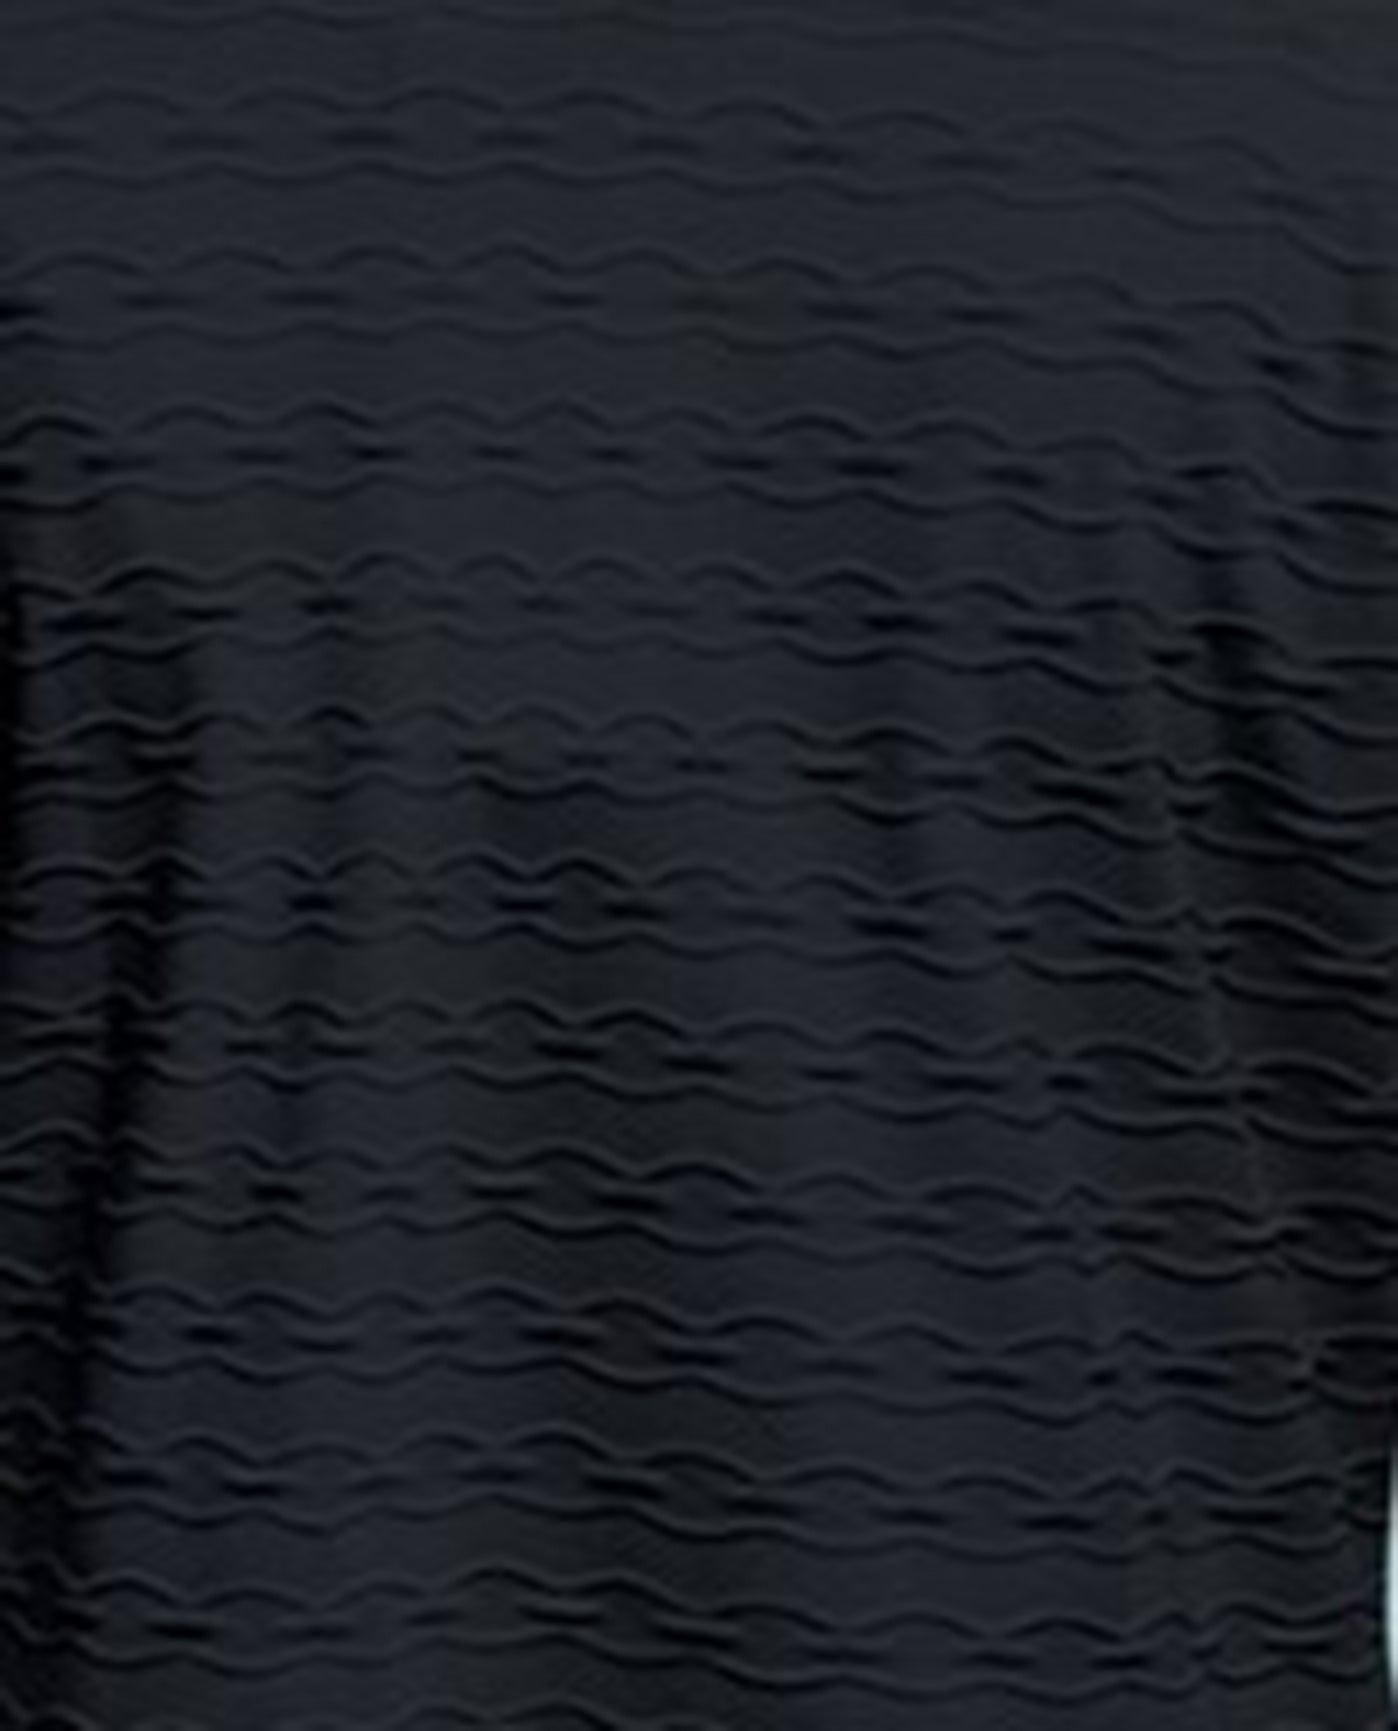 FABRIC SWATCH VIEW OF AQUAMORE SOLID TEXTURED ZIPPER HOODIE COVER UP TUNIC | 017 AQM TEXTURED BLACK